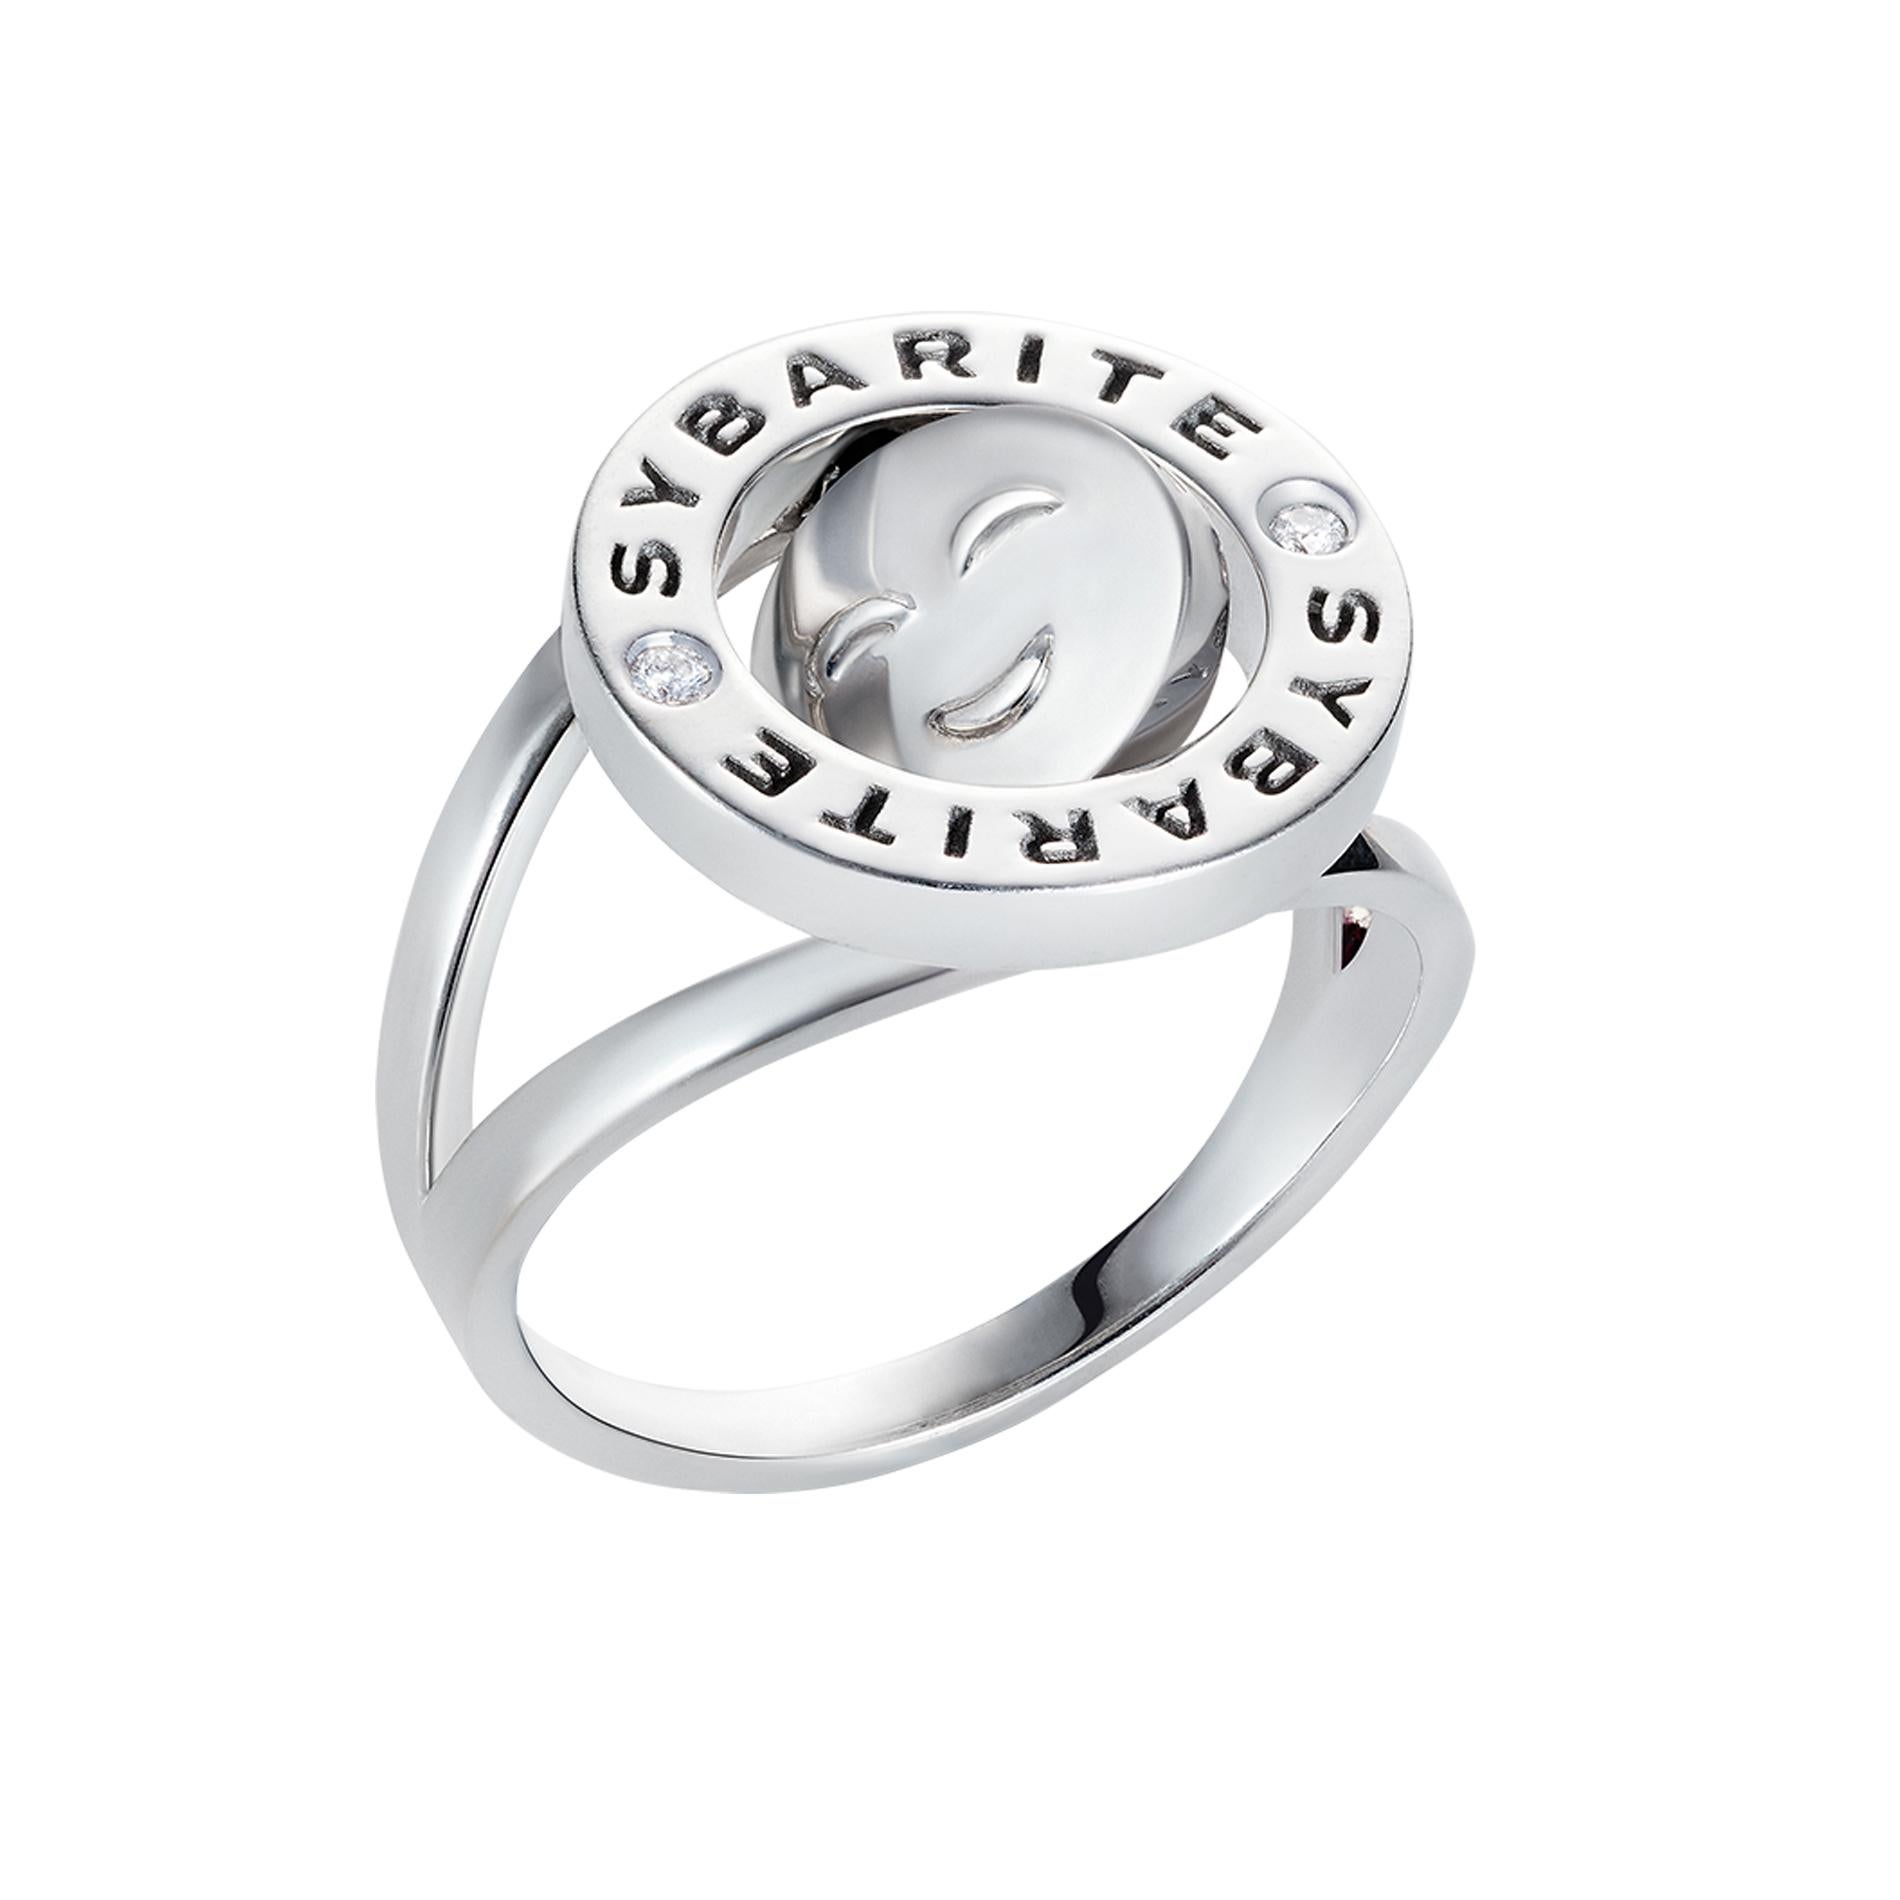 Give the gift of joy with Sybarite. Designed with giving in mind, this ring reflects the jubilation of gifting with a joyous design, intended to be spun and enjoyed by its wearer. Crafted with the utmost expertise in 18k white gold and set with